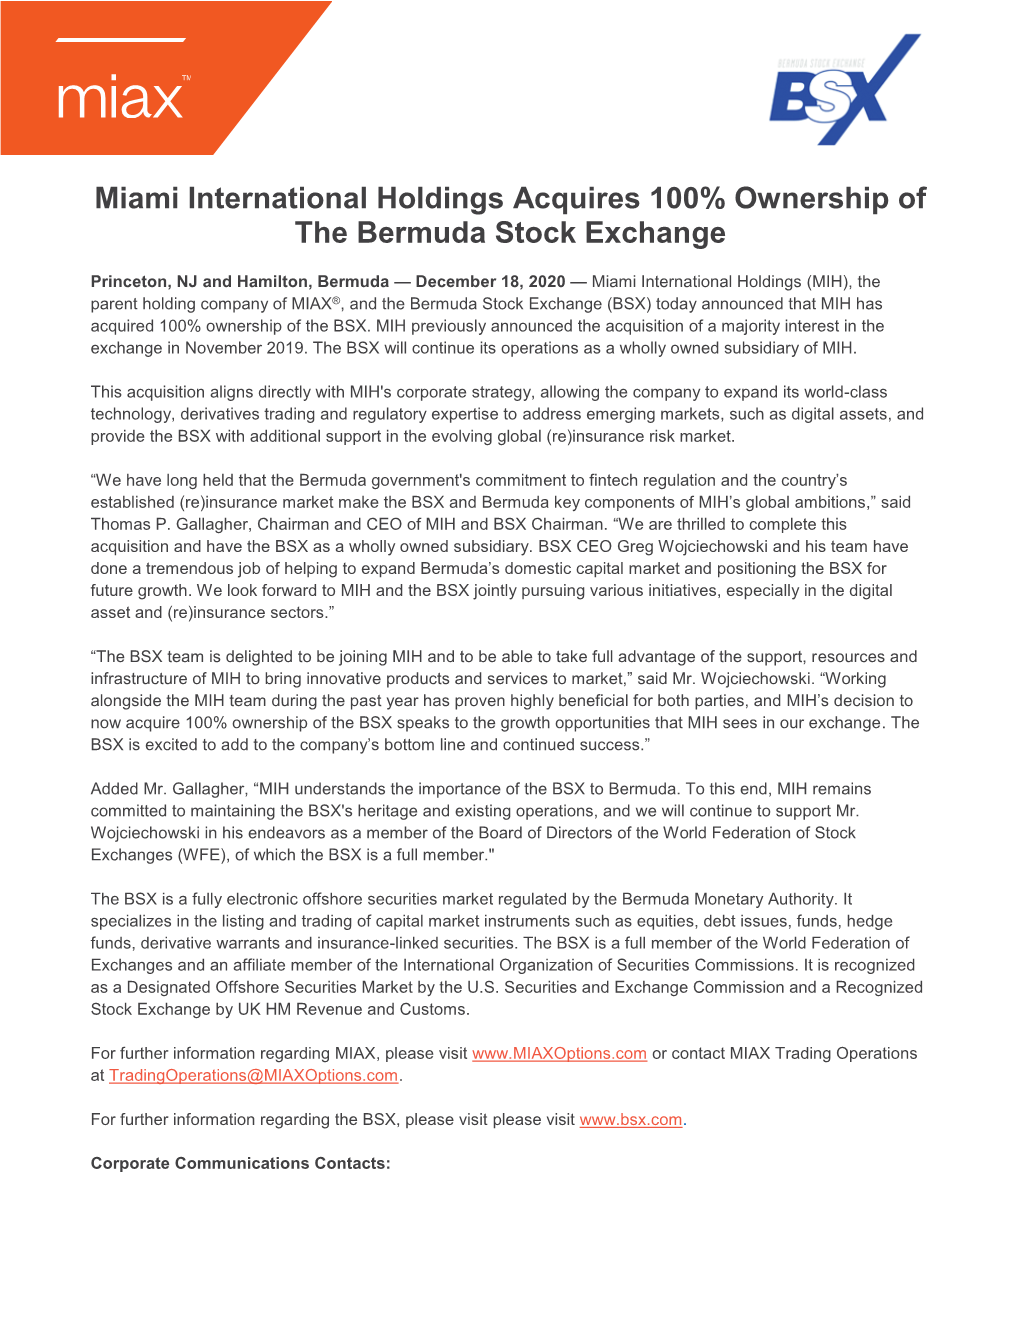 Miami International Holdings Acquires 100% Ownership of the Bermuda Stock Exchange